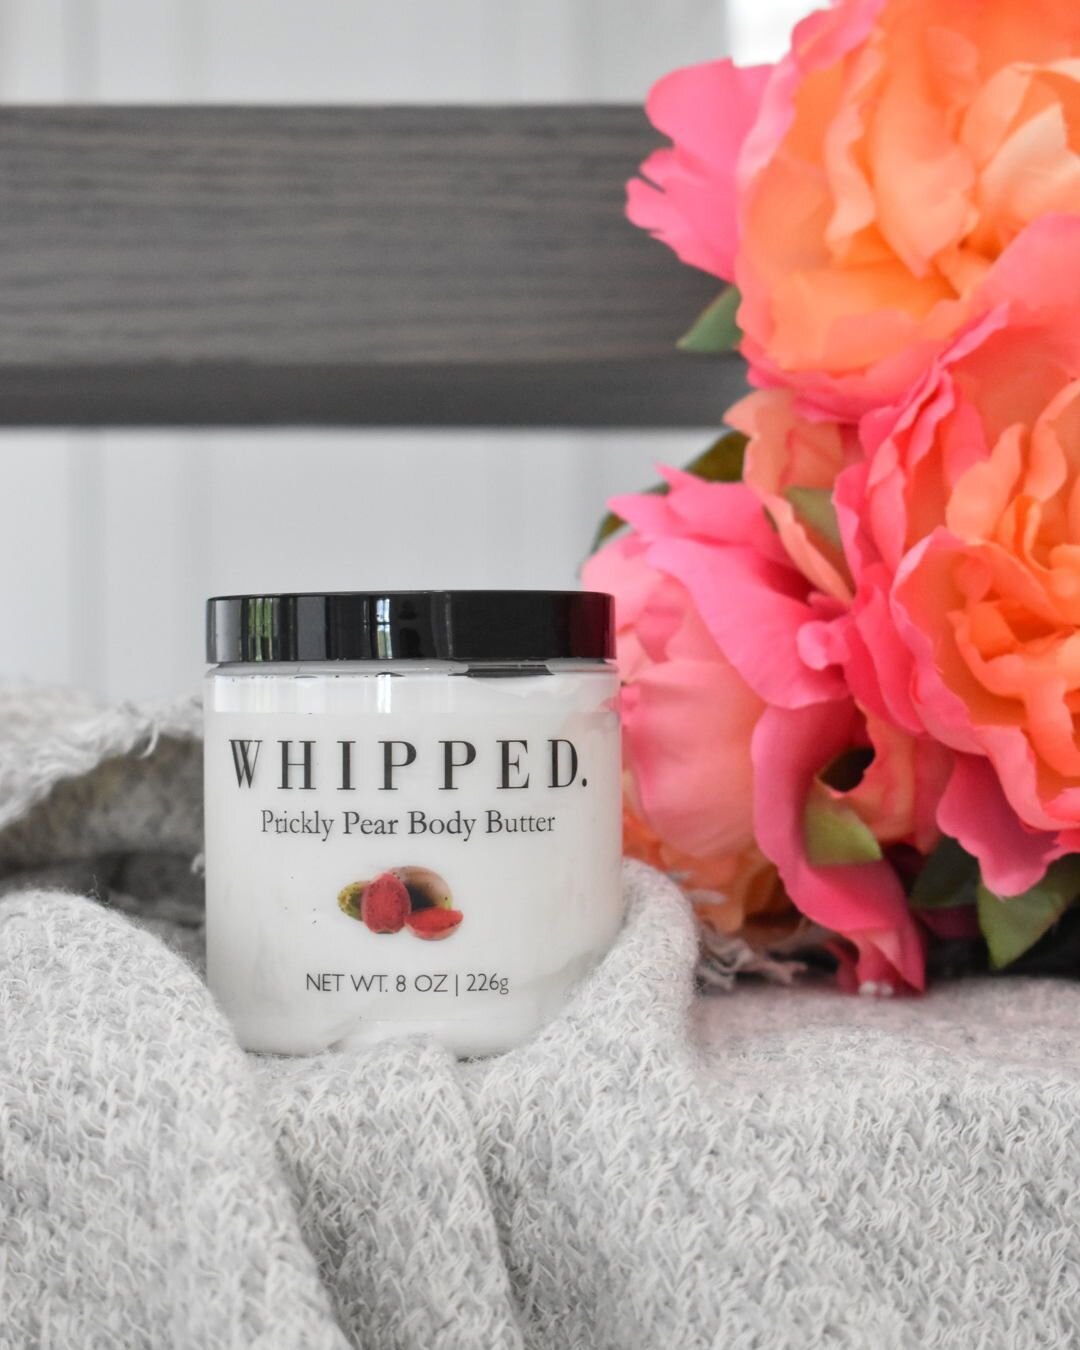 If you haven't tried our new WHIPPED. Prickly Pear Body Butter, then you're missing out. Our body butter is made with prickly pear oil that has anti-aging, hydrating, &amp; antibacterial properties that can enhance the tone &amp; texture in your skin